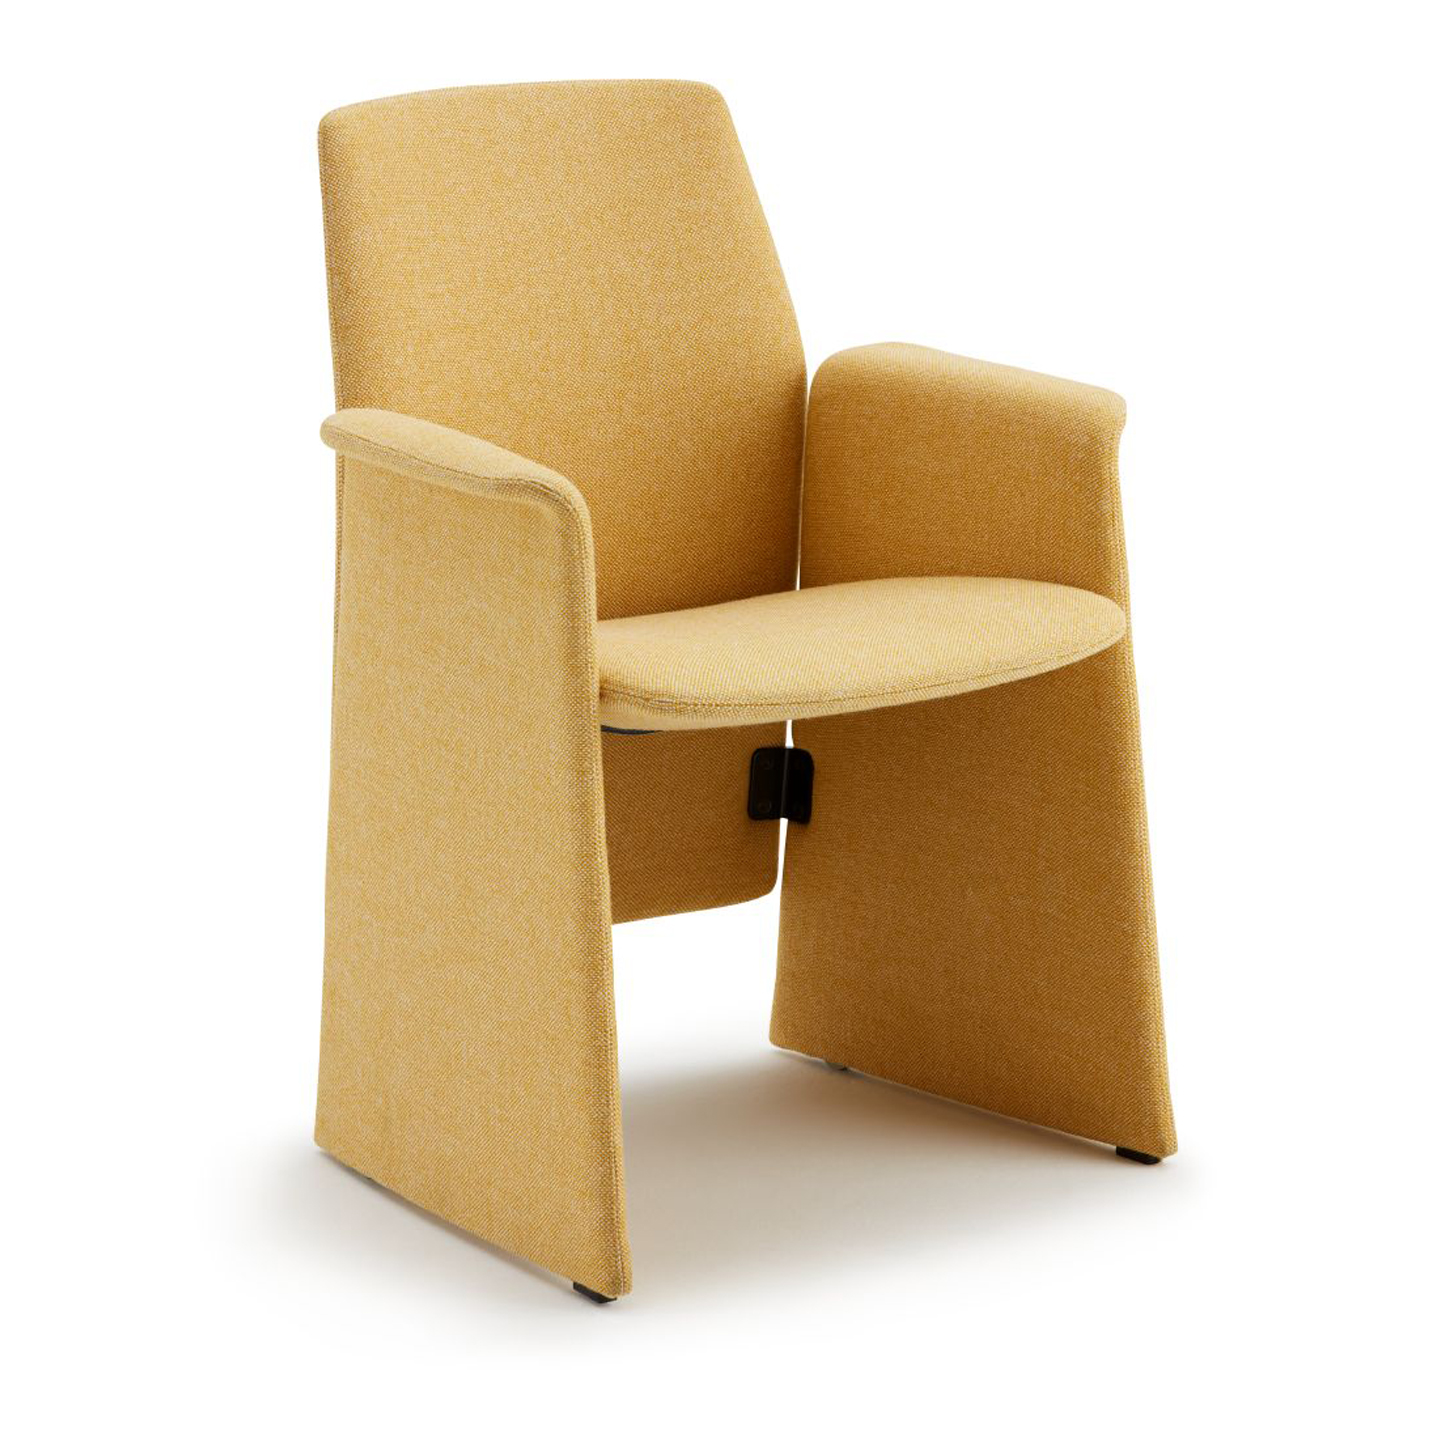 Haworth Downtown chair in beige upholstery 